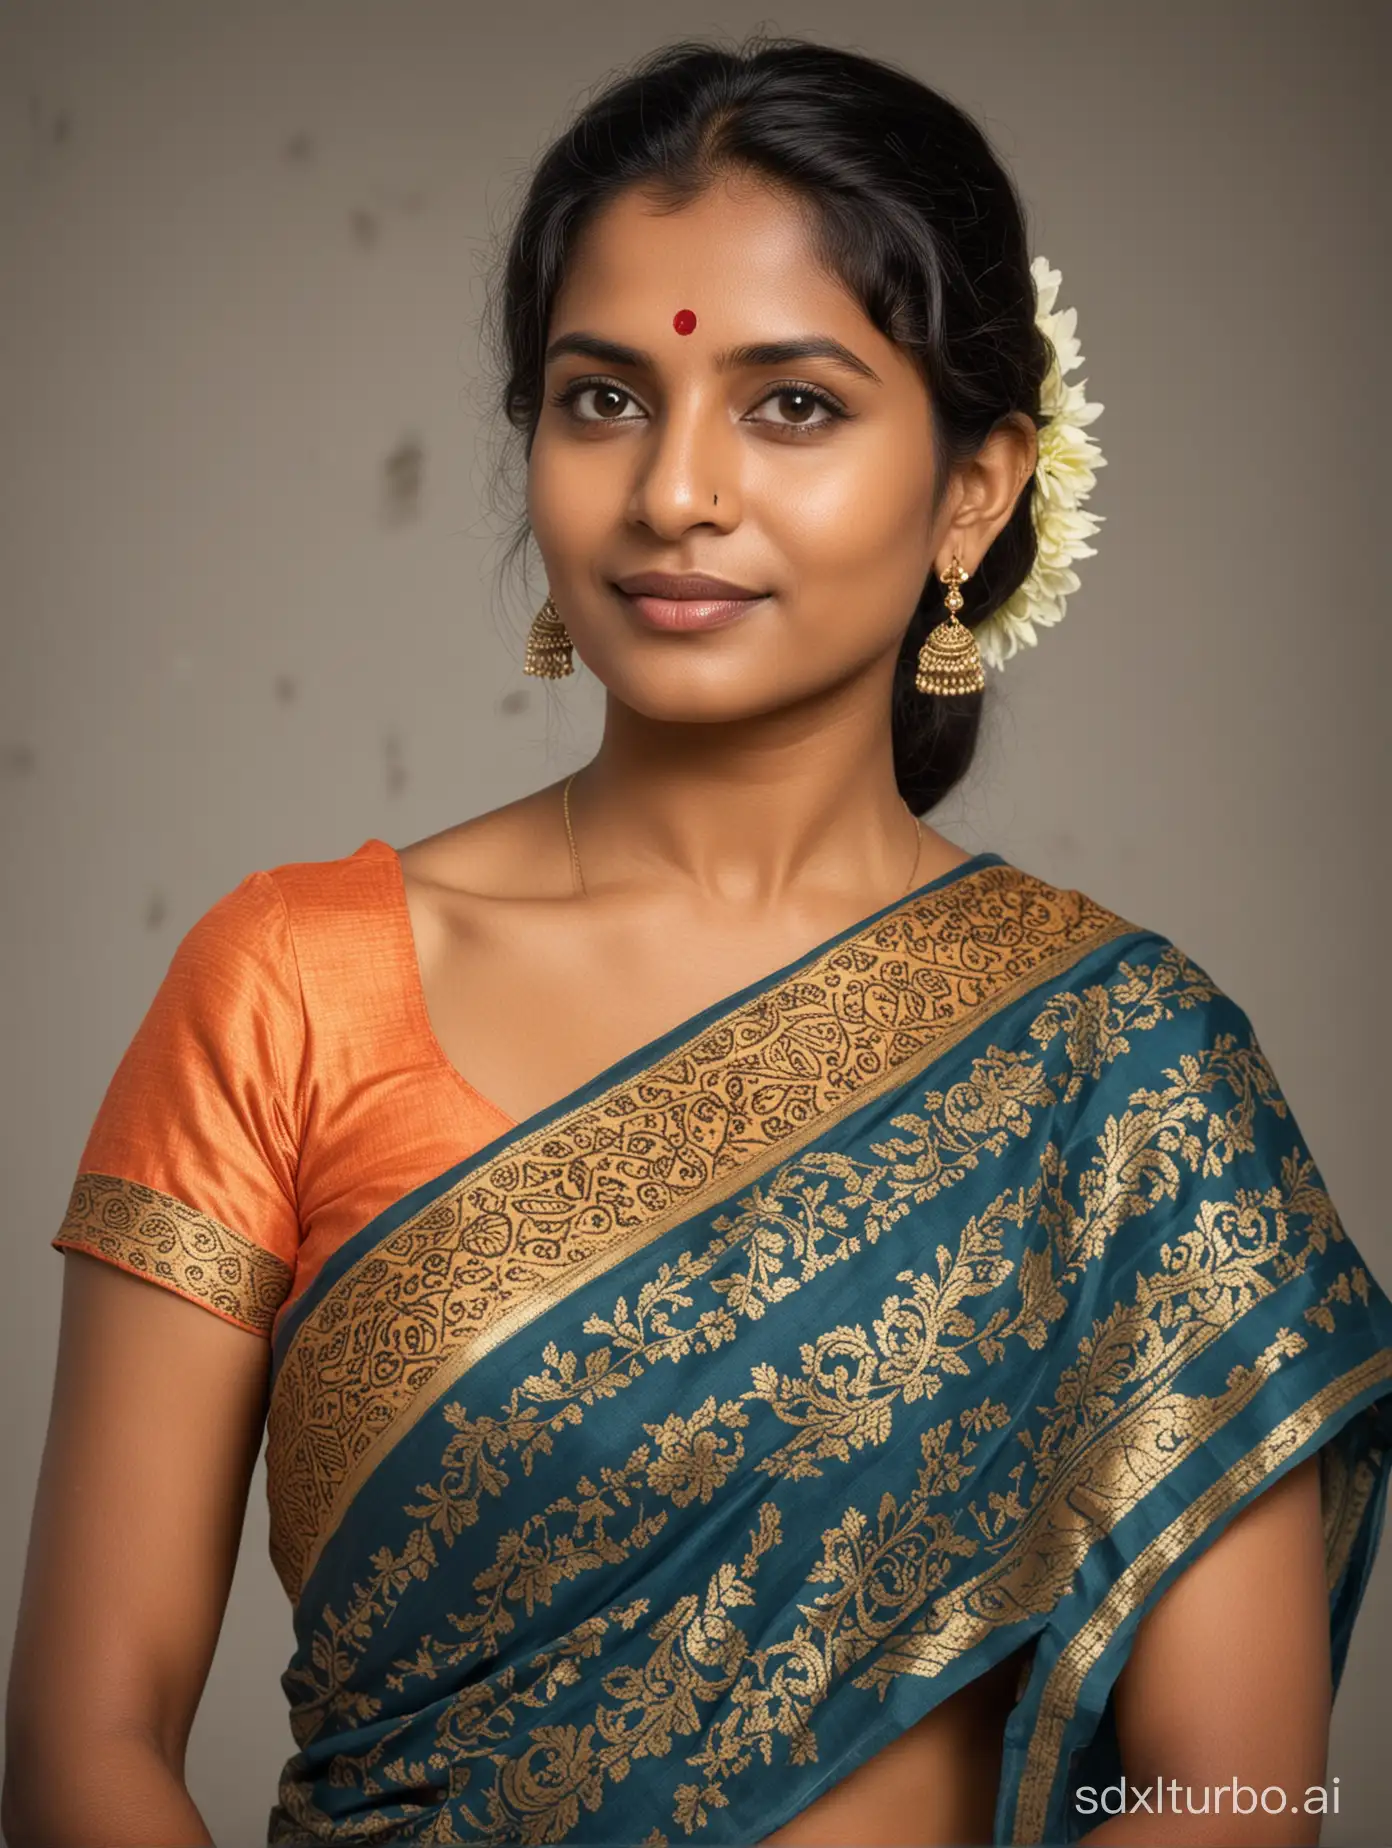 Portrait of a Sri Lankan woman wearing a saree, high quality, photography, full details